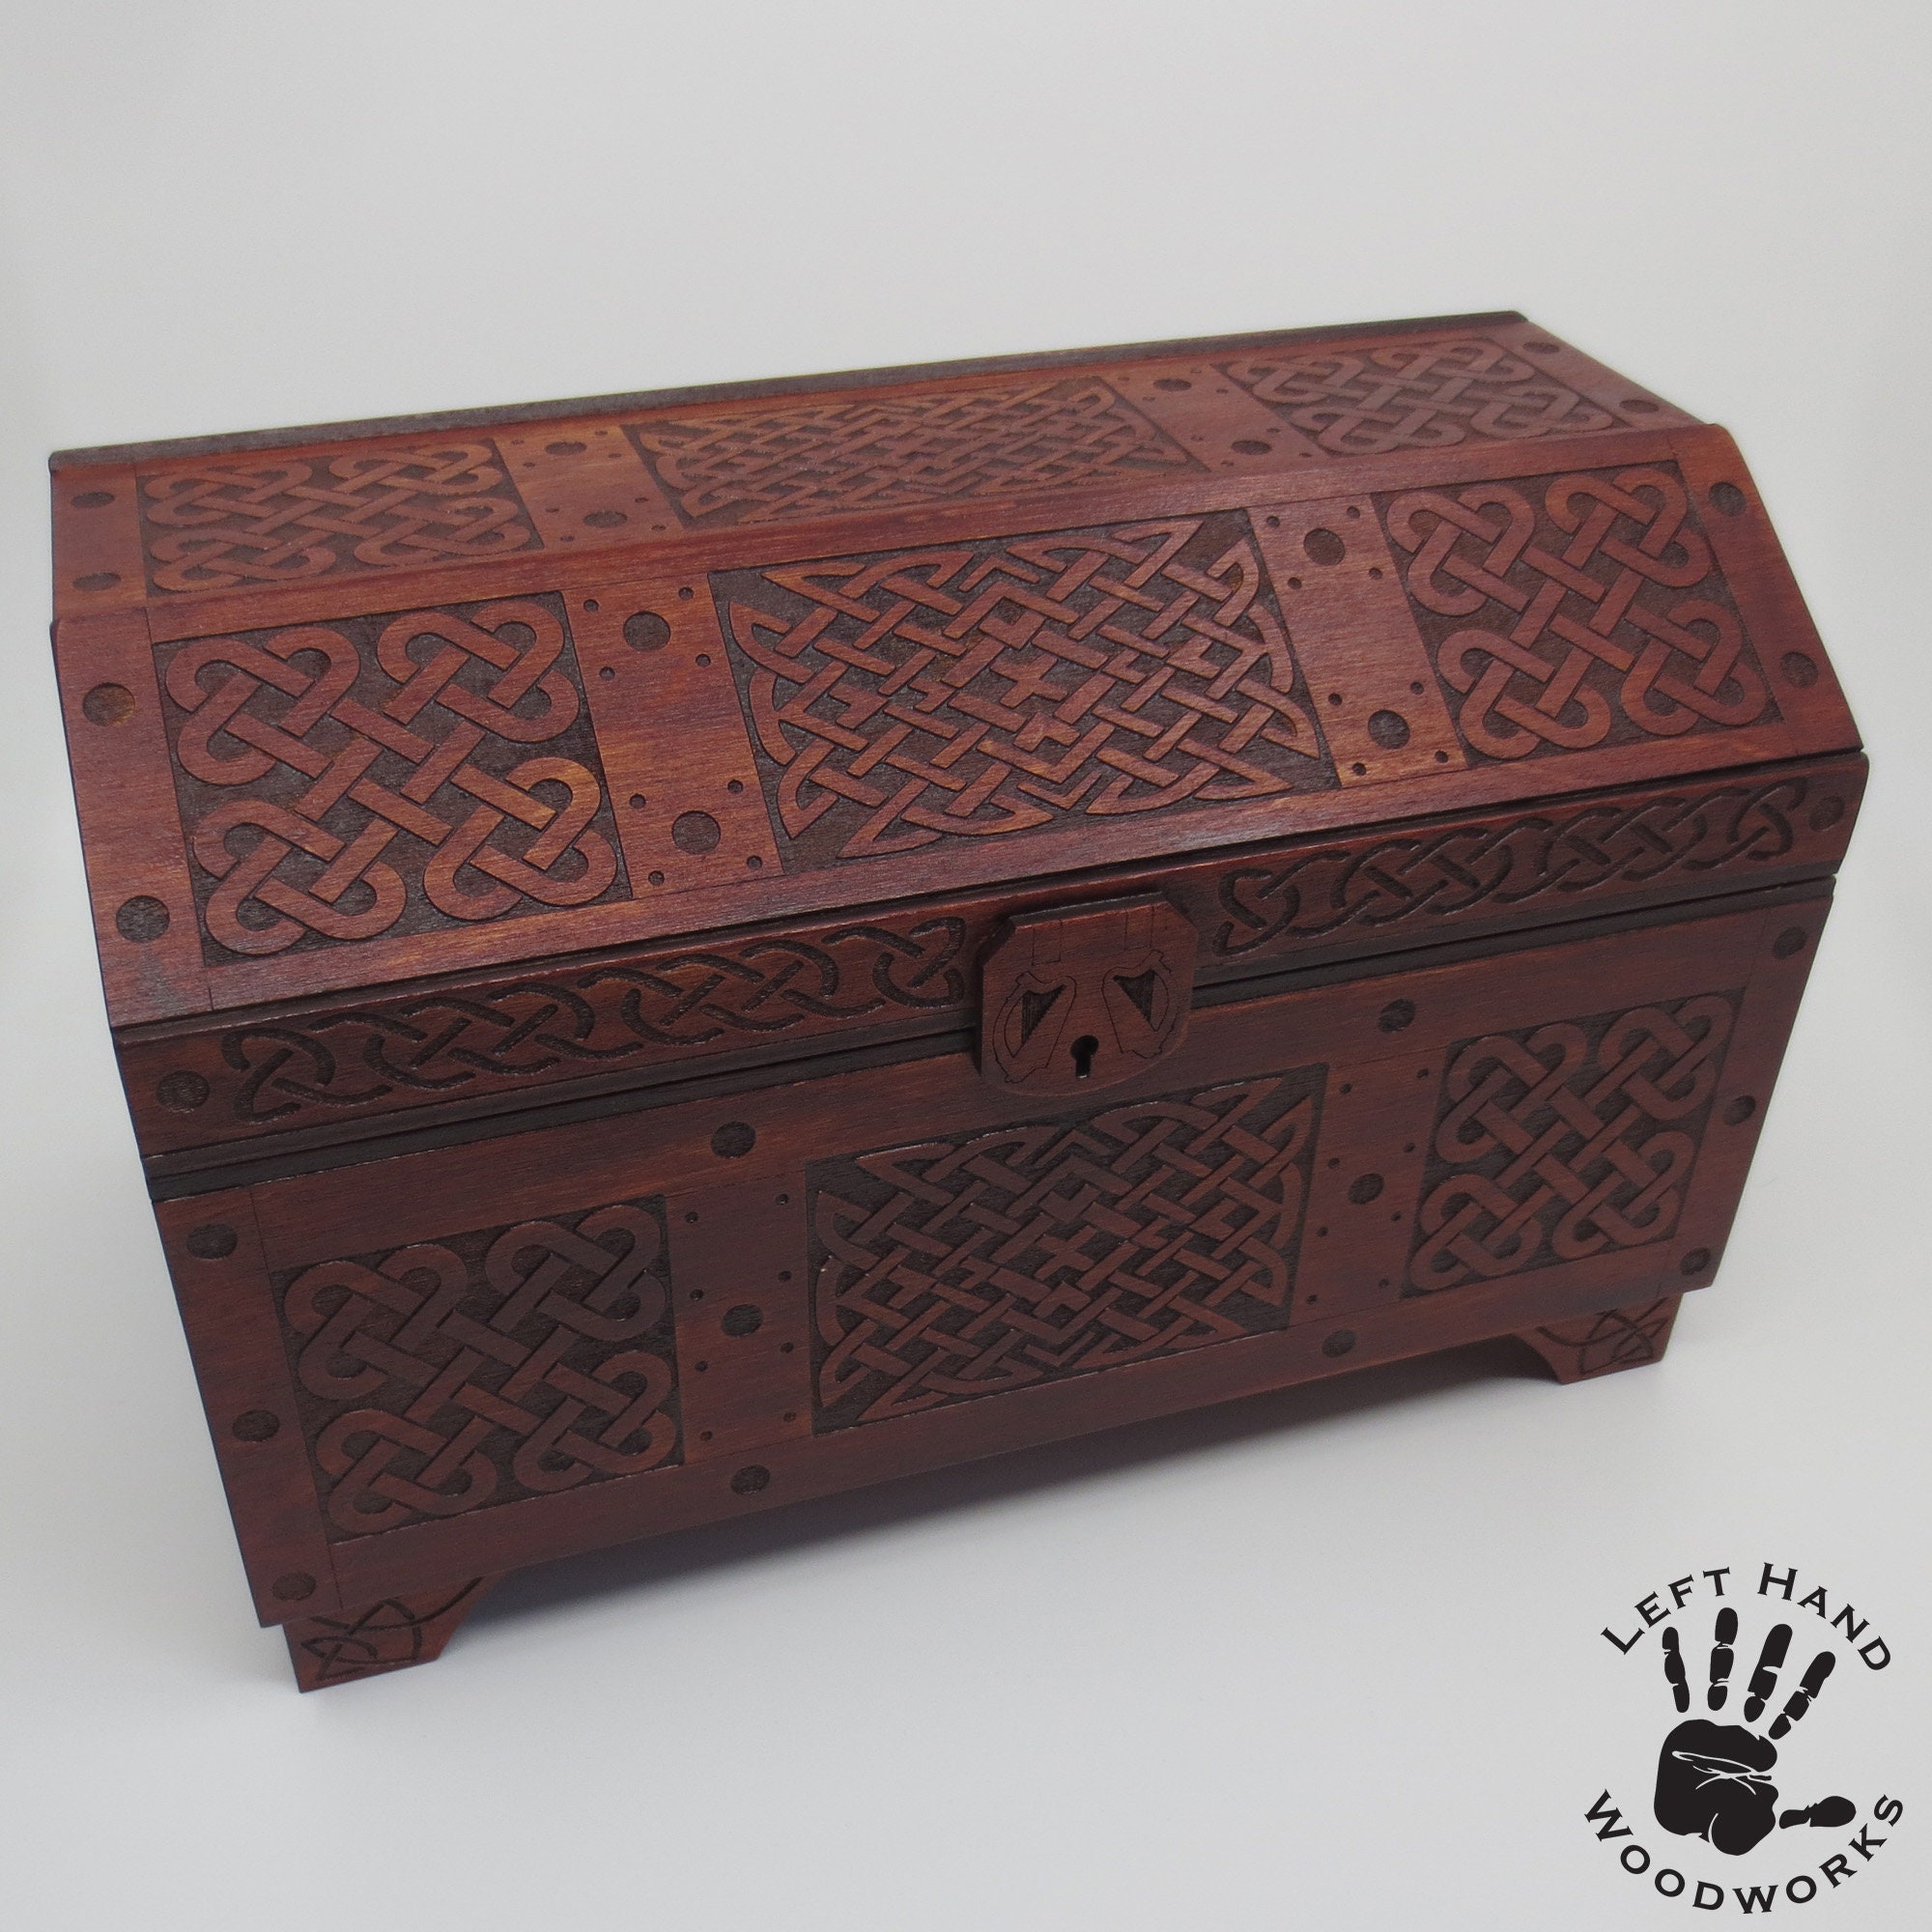 Decorative Vintage Wood Treasure Chest, 8.3x5.5x5.5 inches with 90 Degree  hinged lid, Old-Fashioned Design, Metal Outline and Buckle [Keepsake